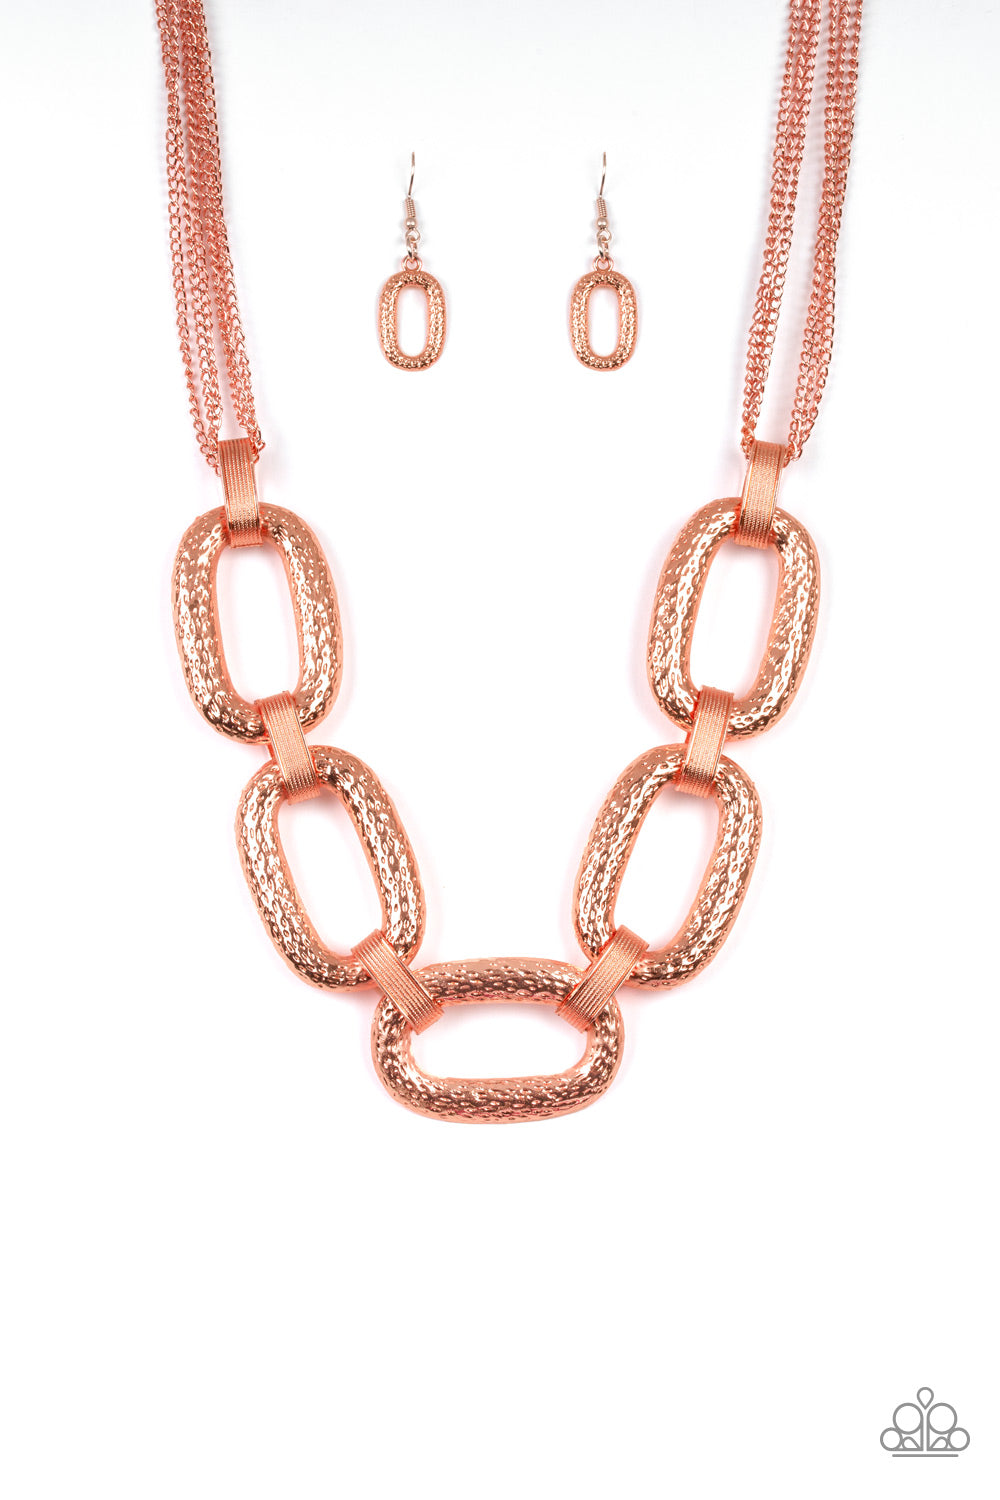 Delicately hammered in blinding shimmer, oversized shiny copper chain links and textured fittings connect below the collar. Suspended from strands of shiny copper chains, the bold links catch and reflect the light for a statement-making finish. Features an adjustable clasp closure